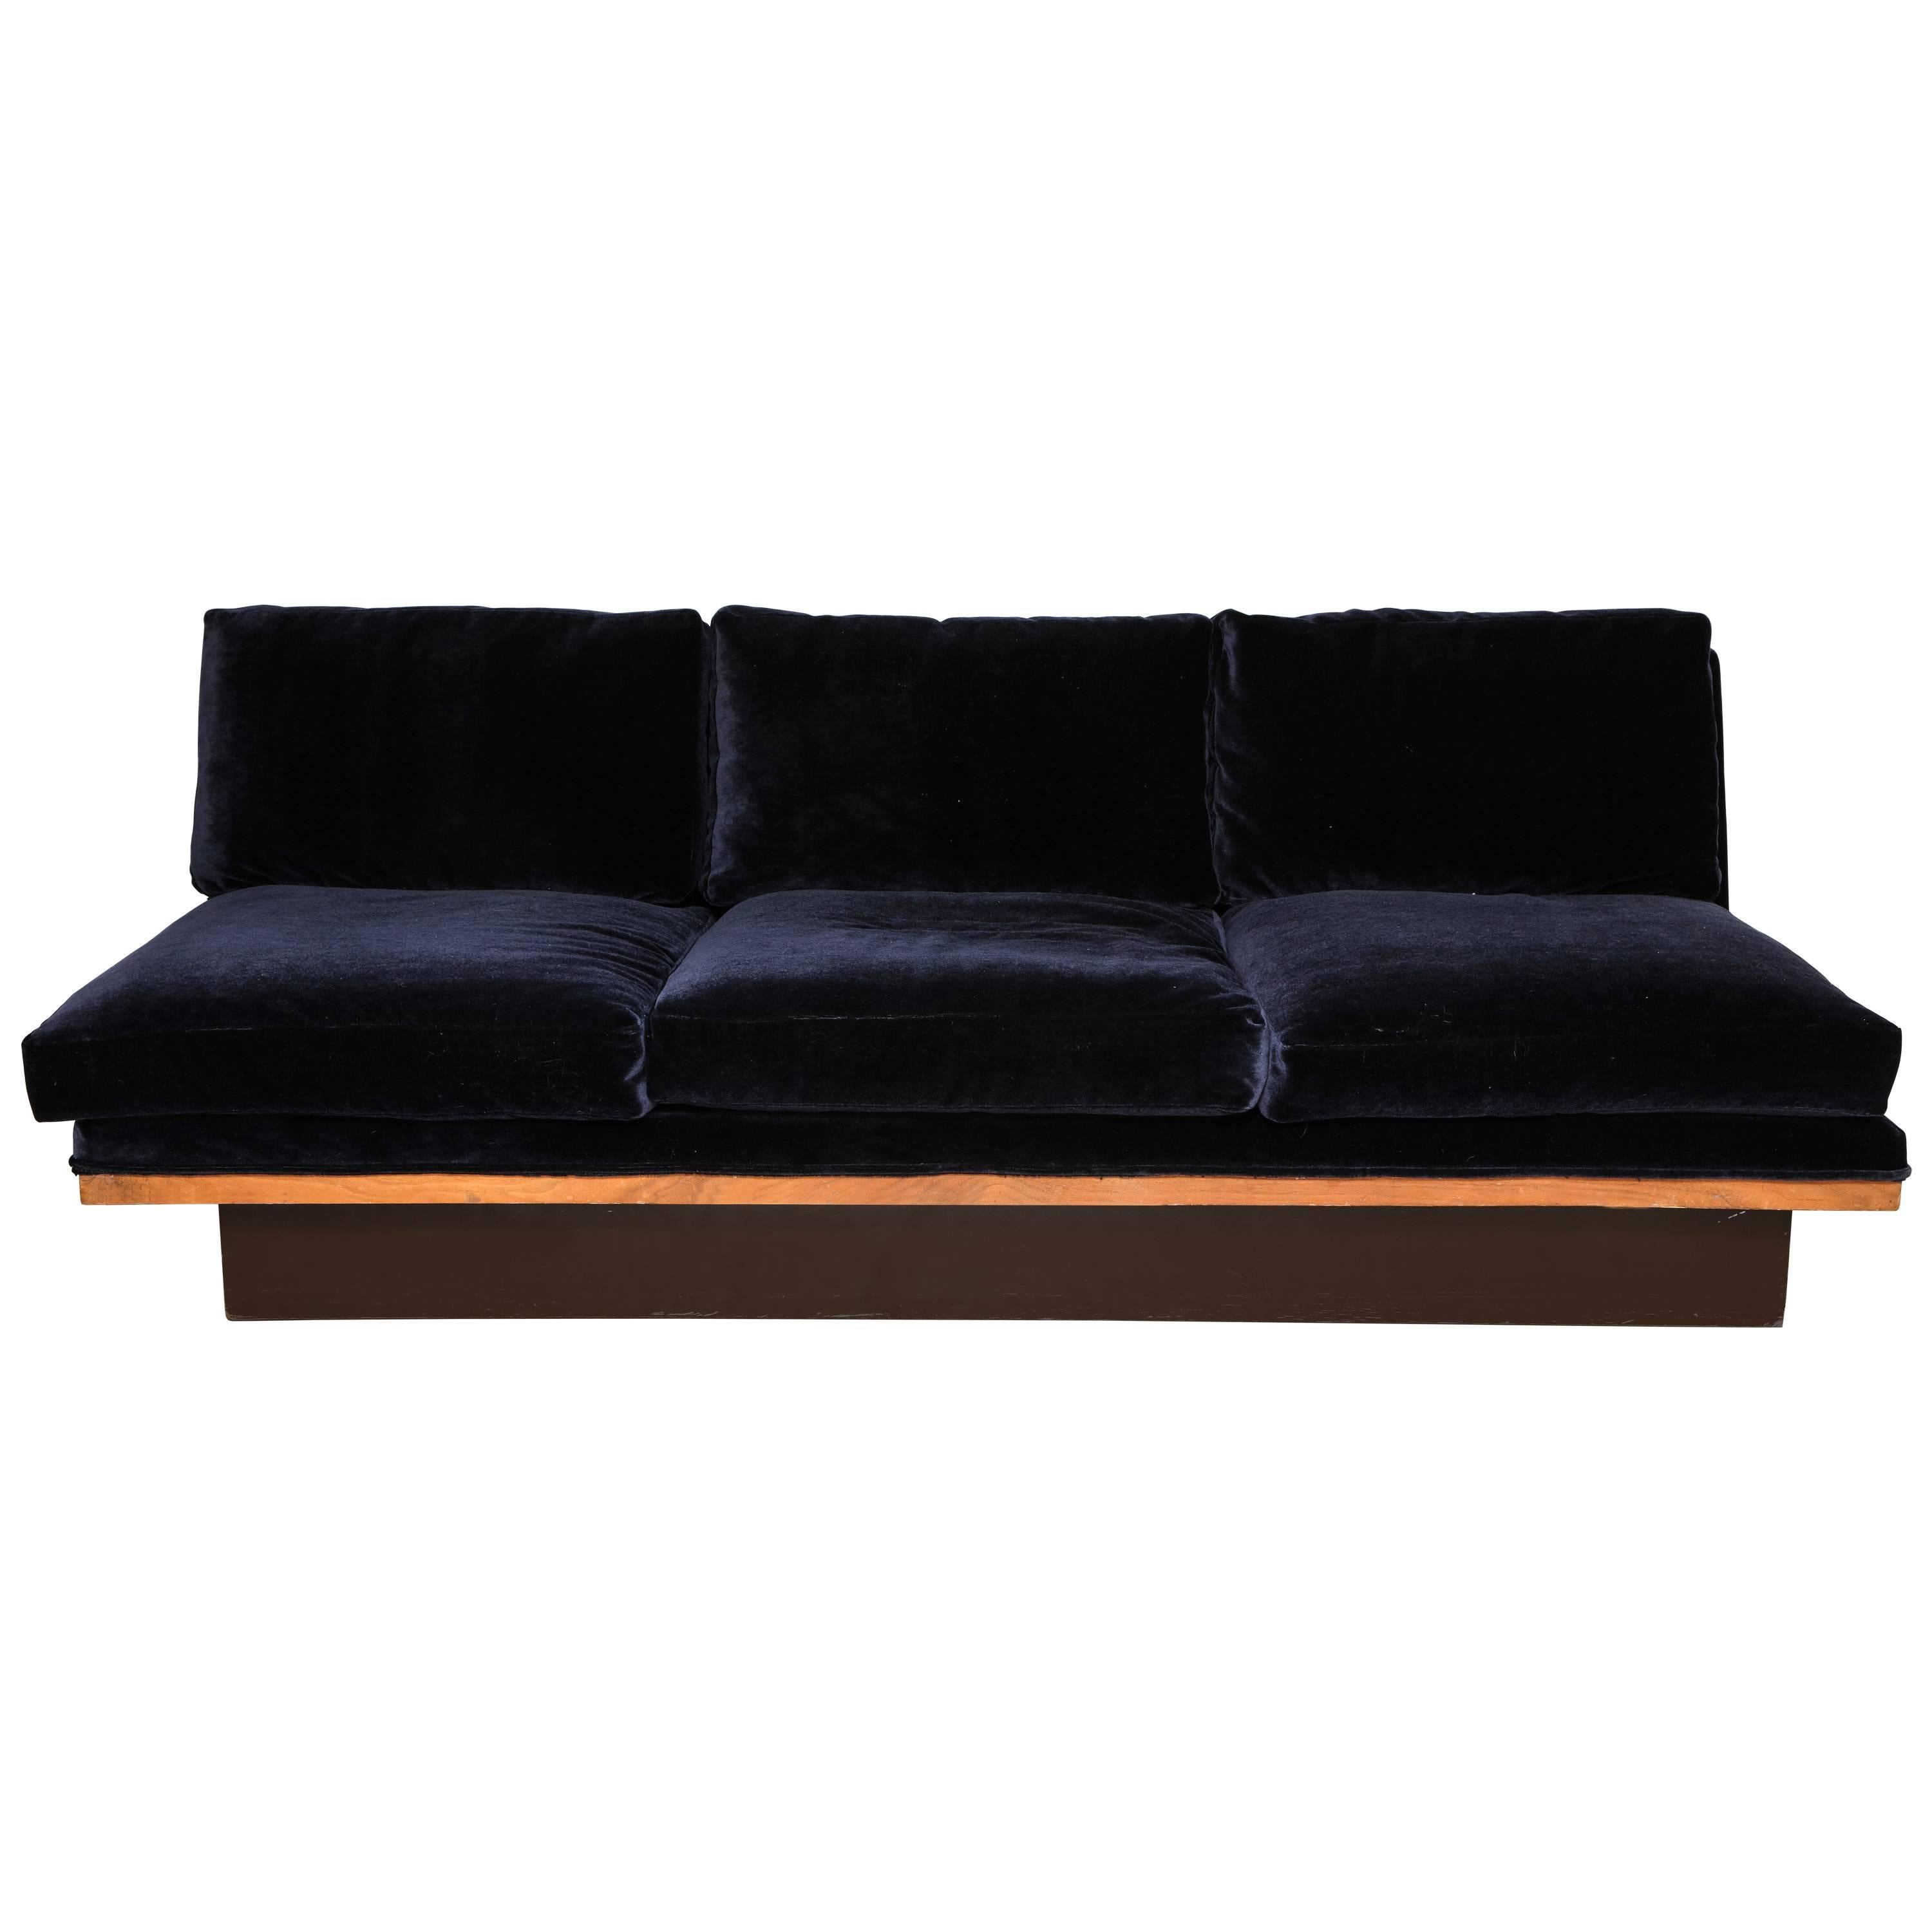 Milo Baughman Thayer Coggin Sofa with wood base black blue mohair, 1980s.

Beautiful shape and extremely comfortable. Newly upholstered in Blue/Black mohair. Sits on a double wood base.

Measures: 84 wide,
28 height,
34 deep.